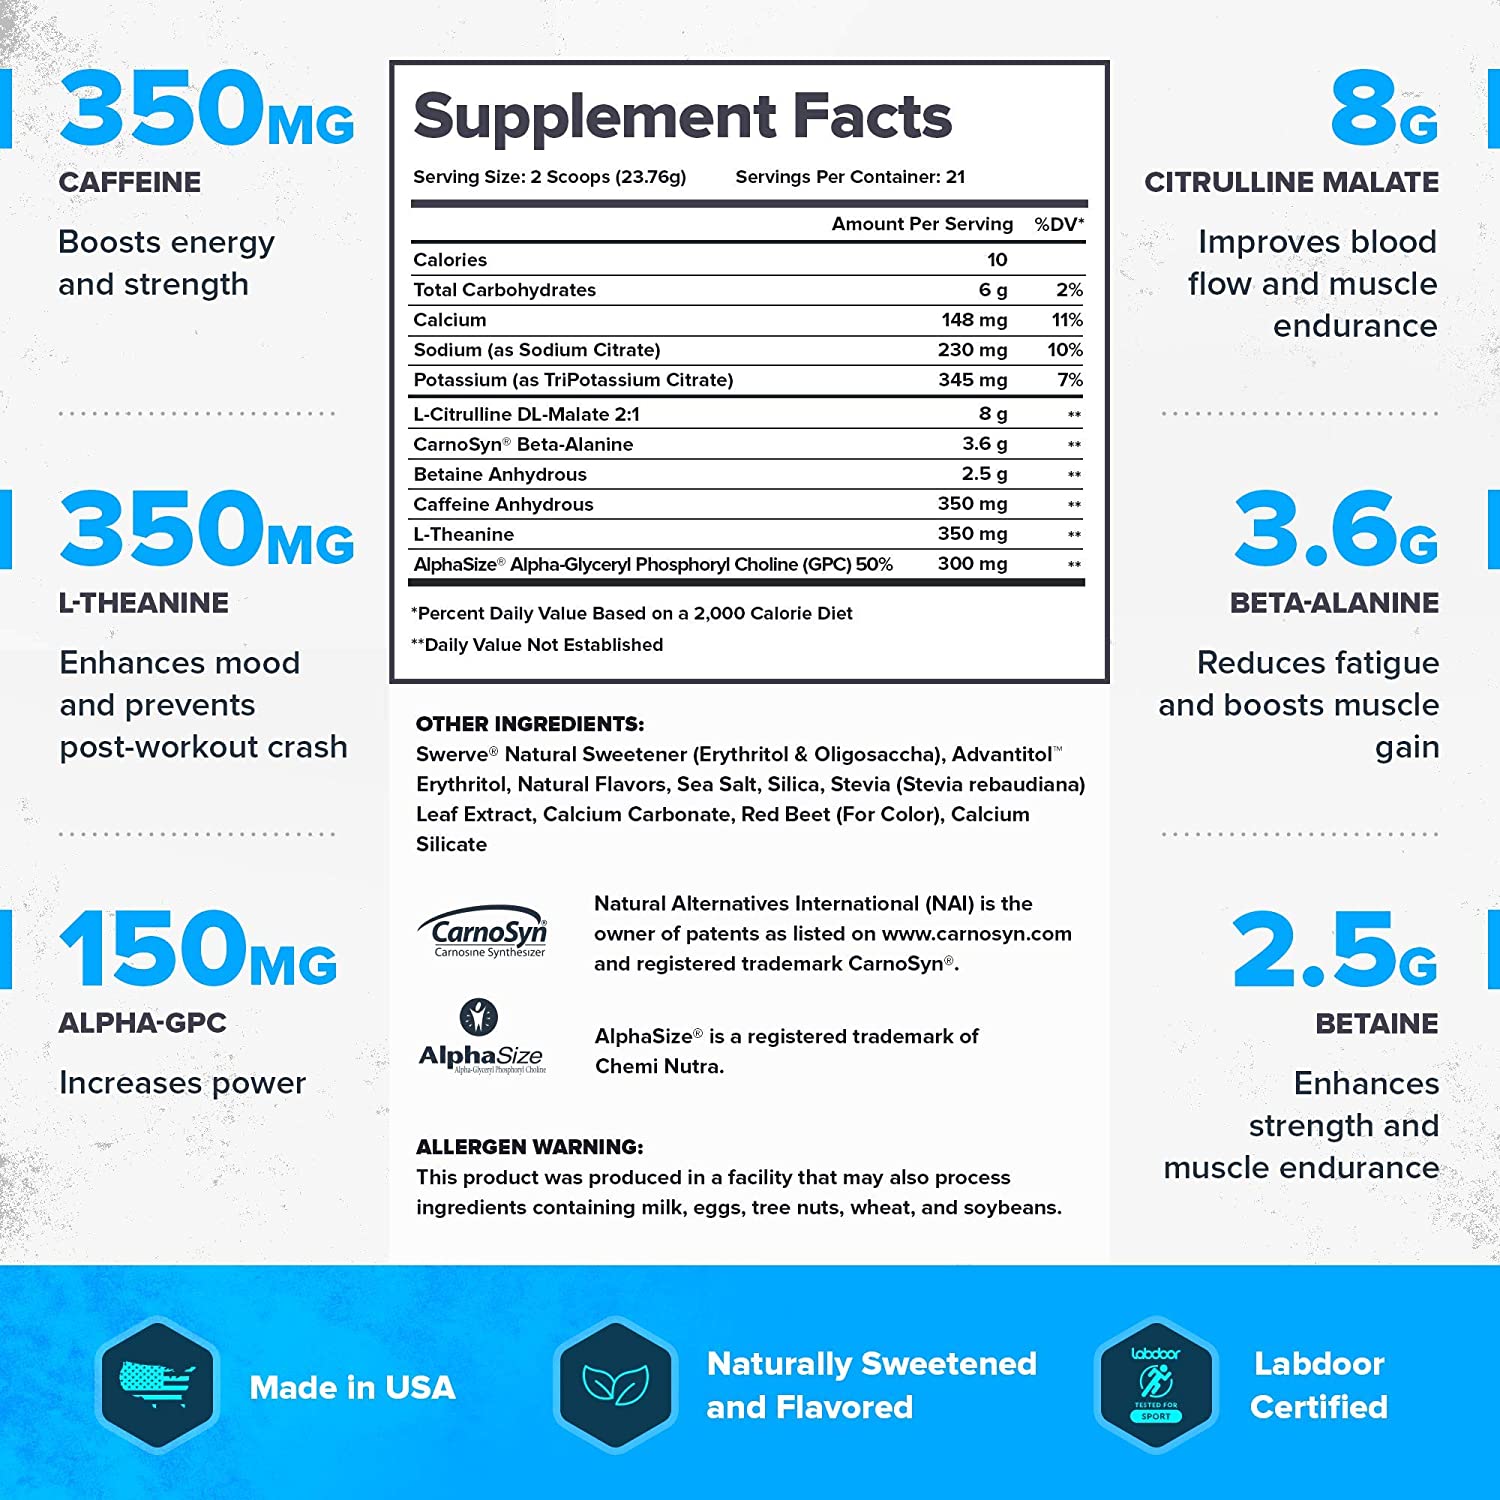 Legion pulse ingredients and supplement facts